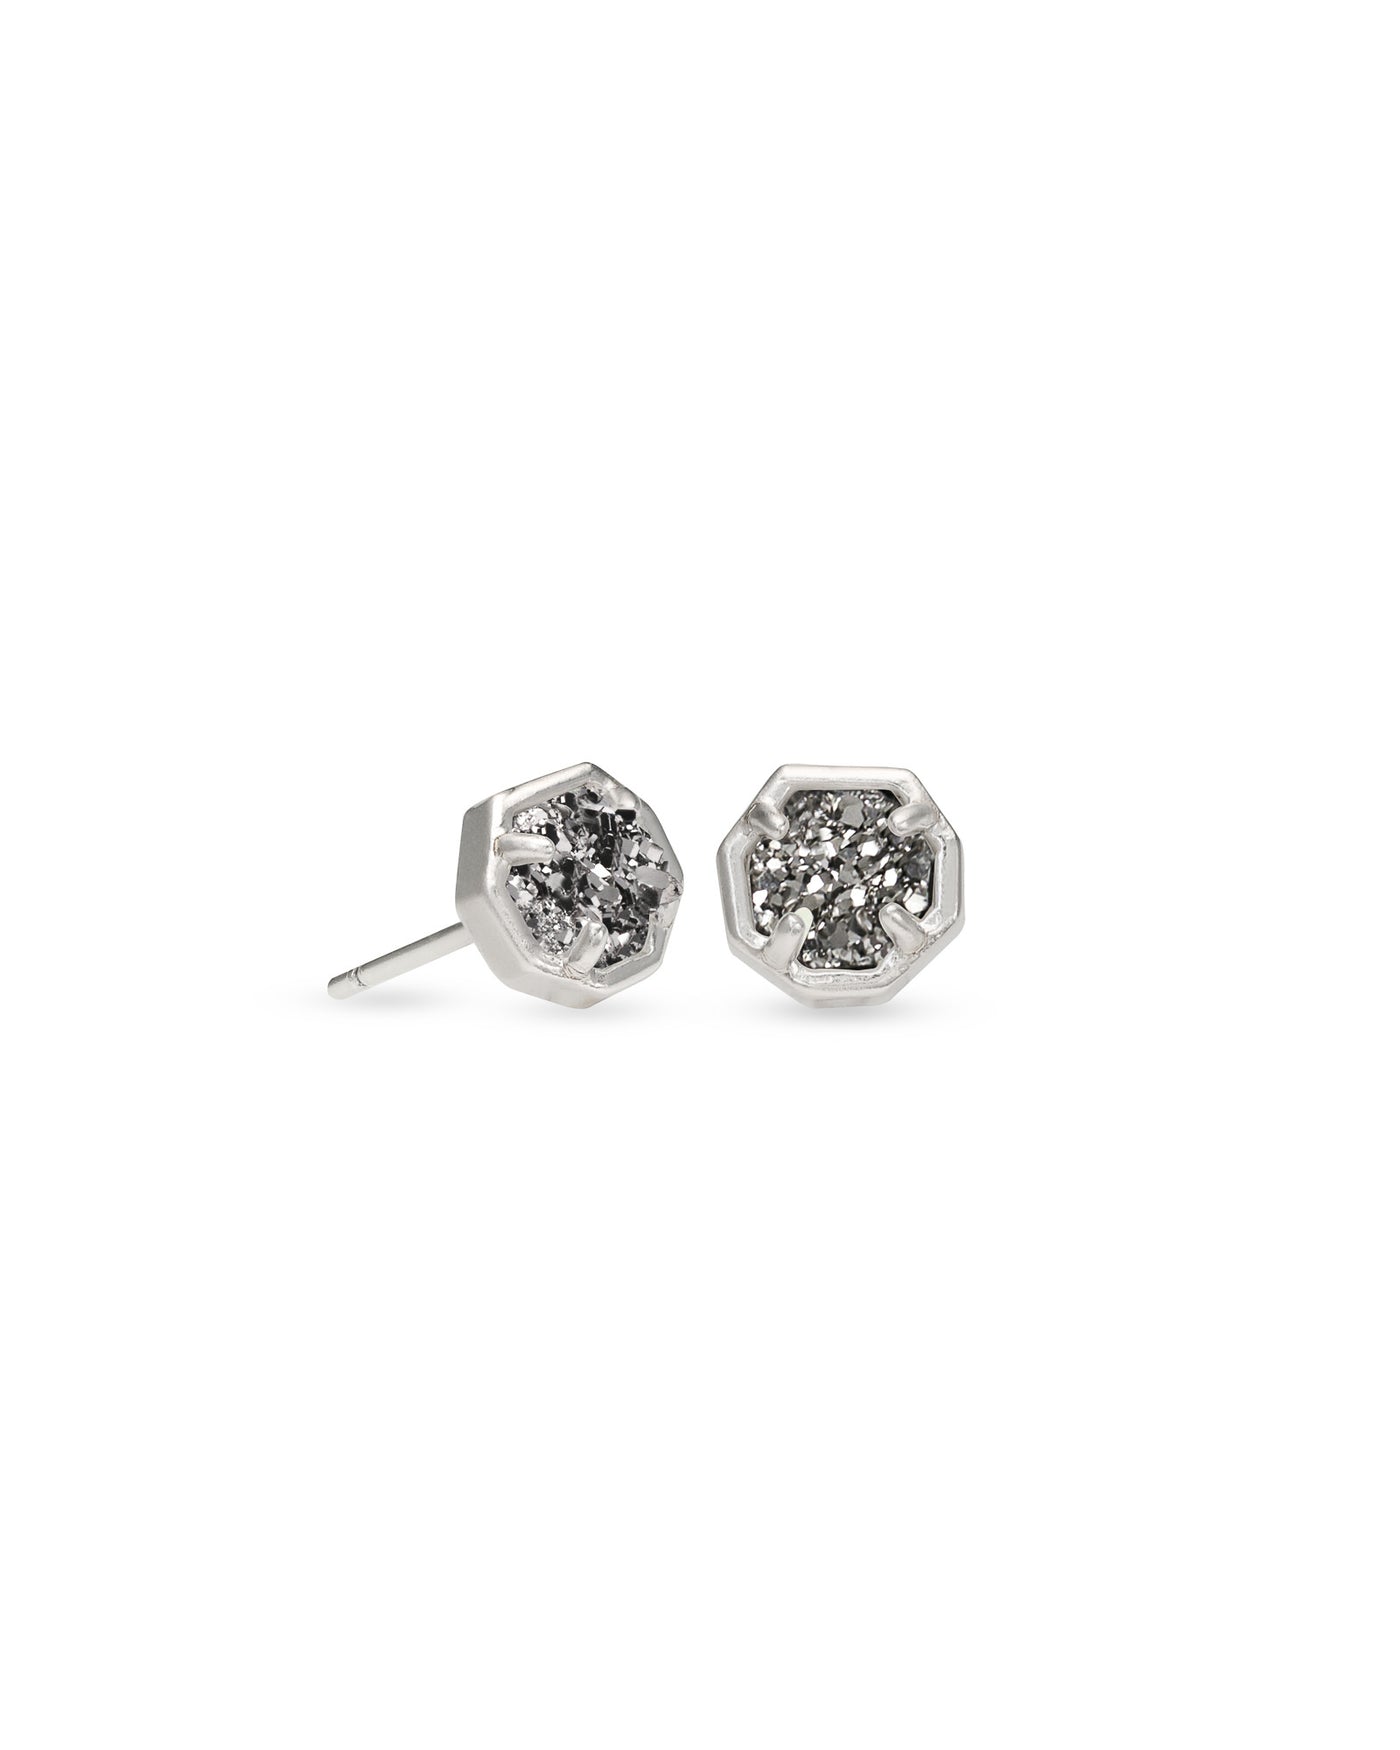 Nola Stud Earrings Silver Platinum Drusy on white background, front view.